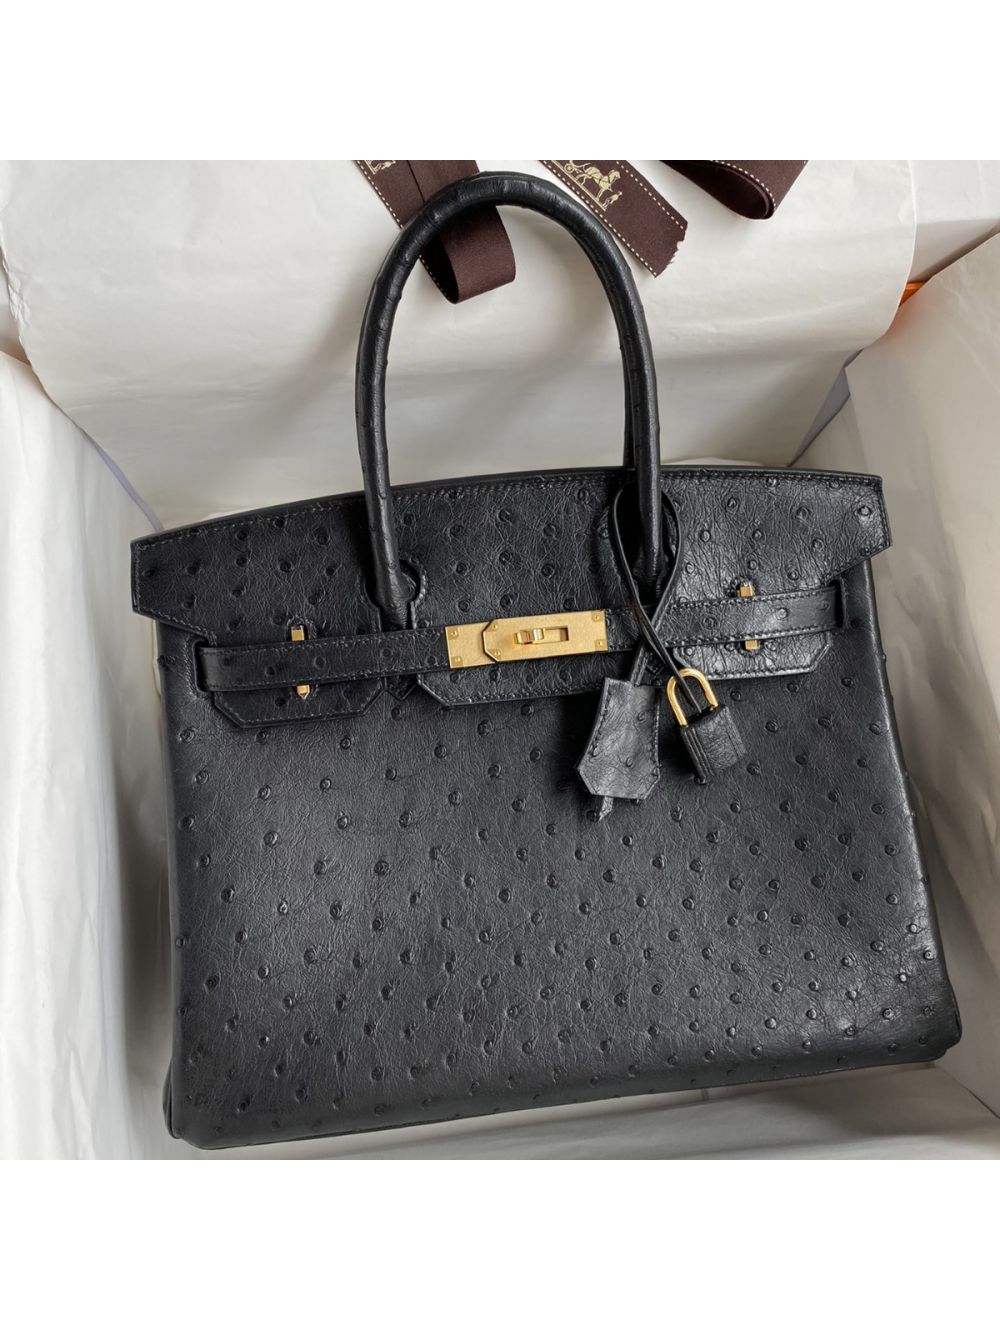 Hermes Terre Cuite Ostrich Leather Birkin 25 Bag GHW For Sale at